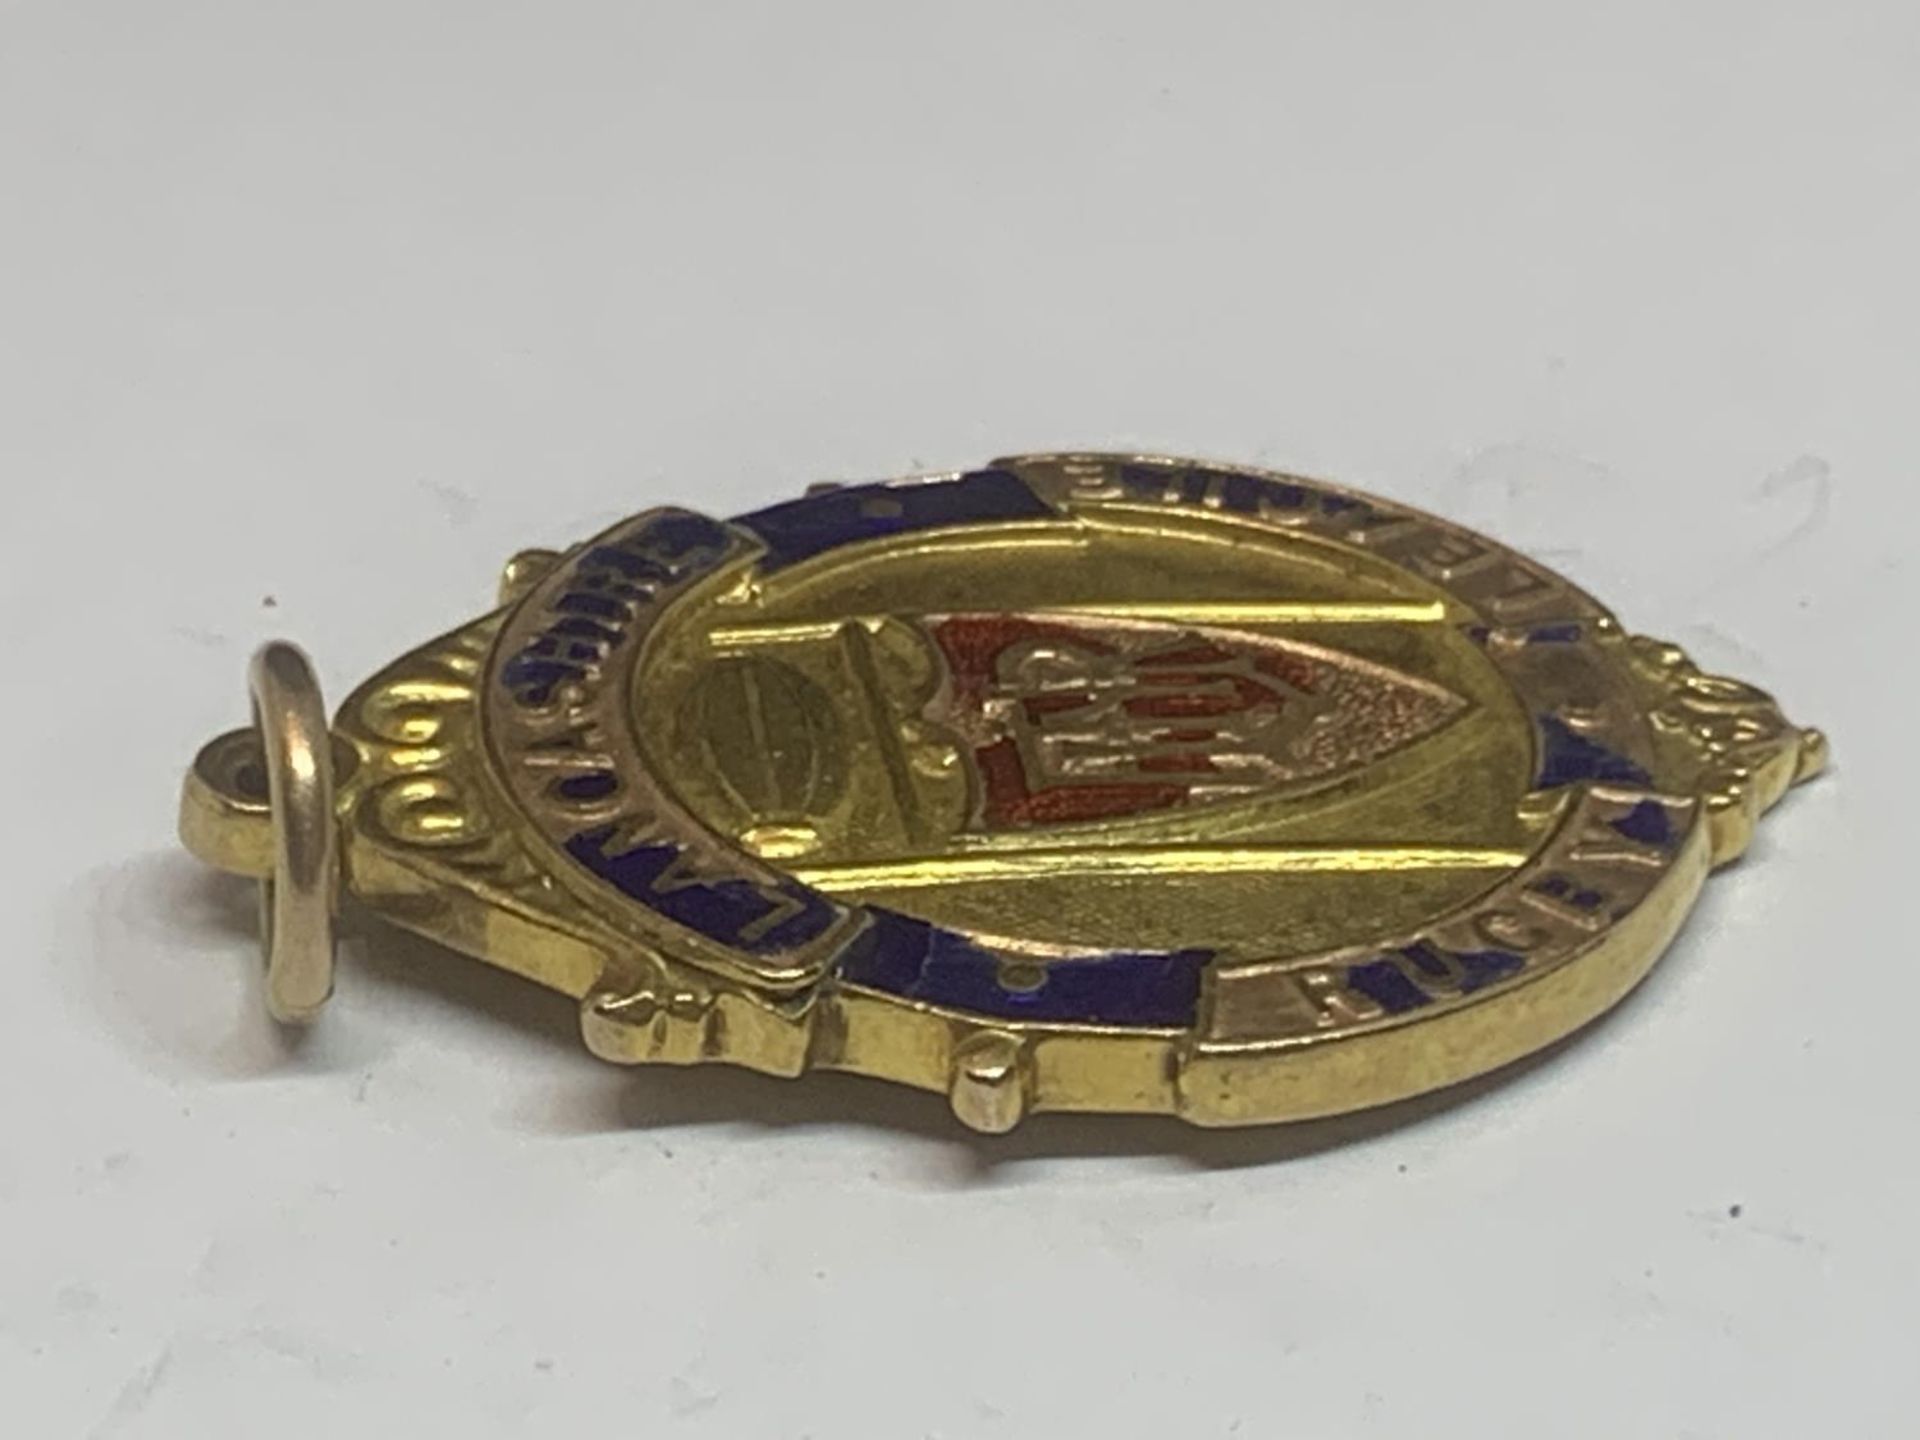 A HALLMARKED 9 CARAT GOLD LANCASHIRE RUGBY LEAGUE MEDAL ENGRAVED WINNERS 1933-34 S. E. MILLER - Image 5 of 5